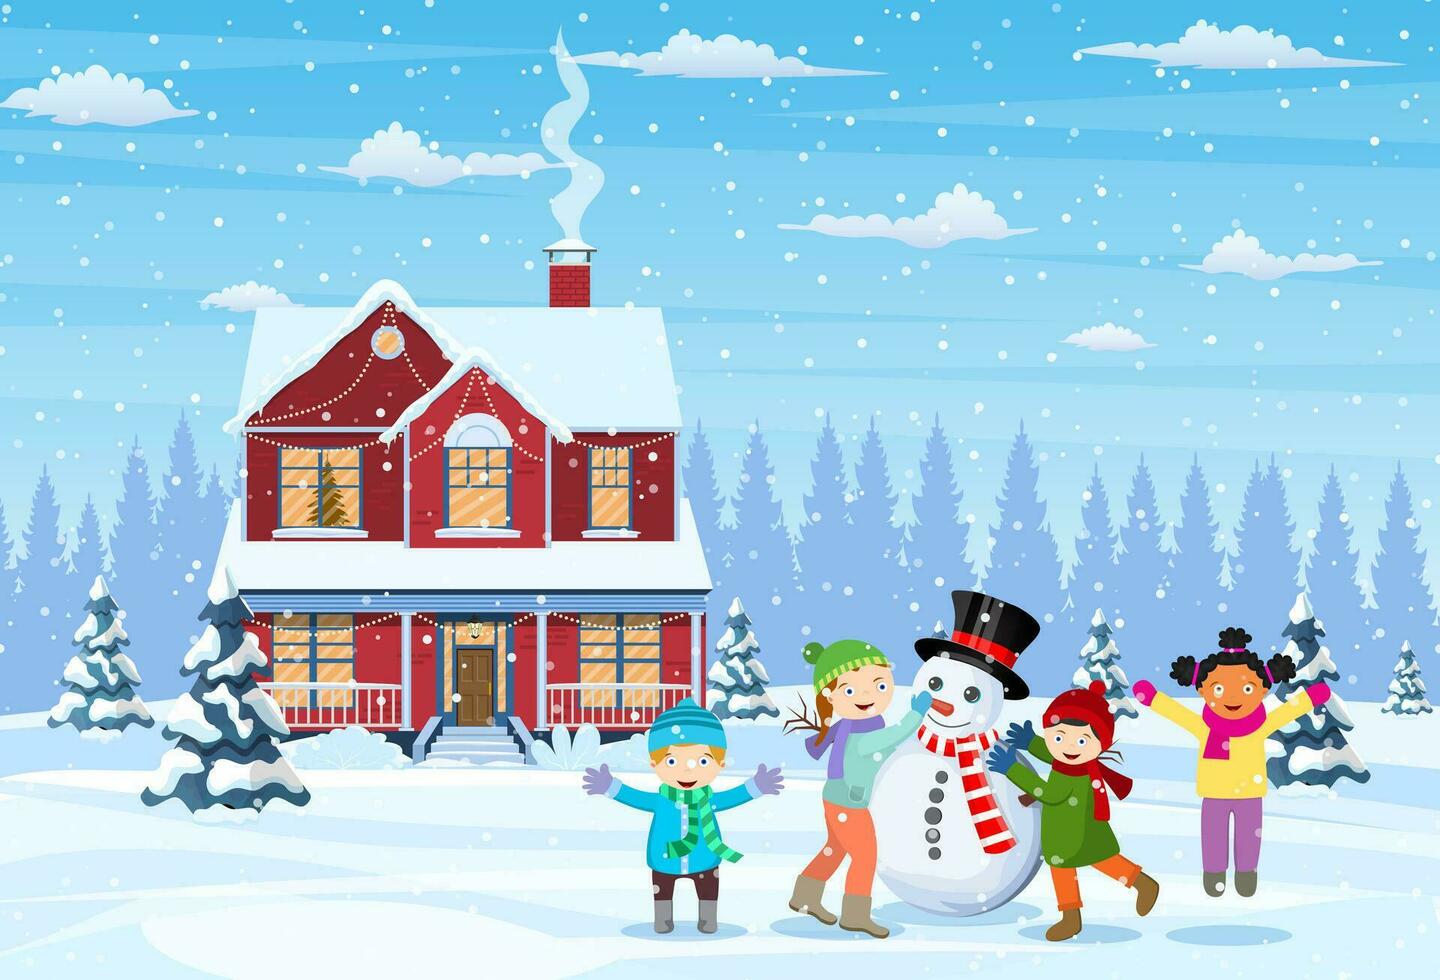 happy new year and merry Christmas greeting card. Christmas landscape.Children building snowman. Winter holidays. Vector illustration in flat style